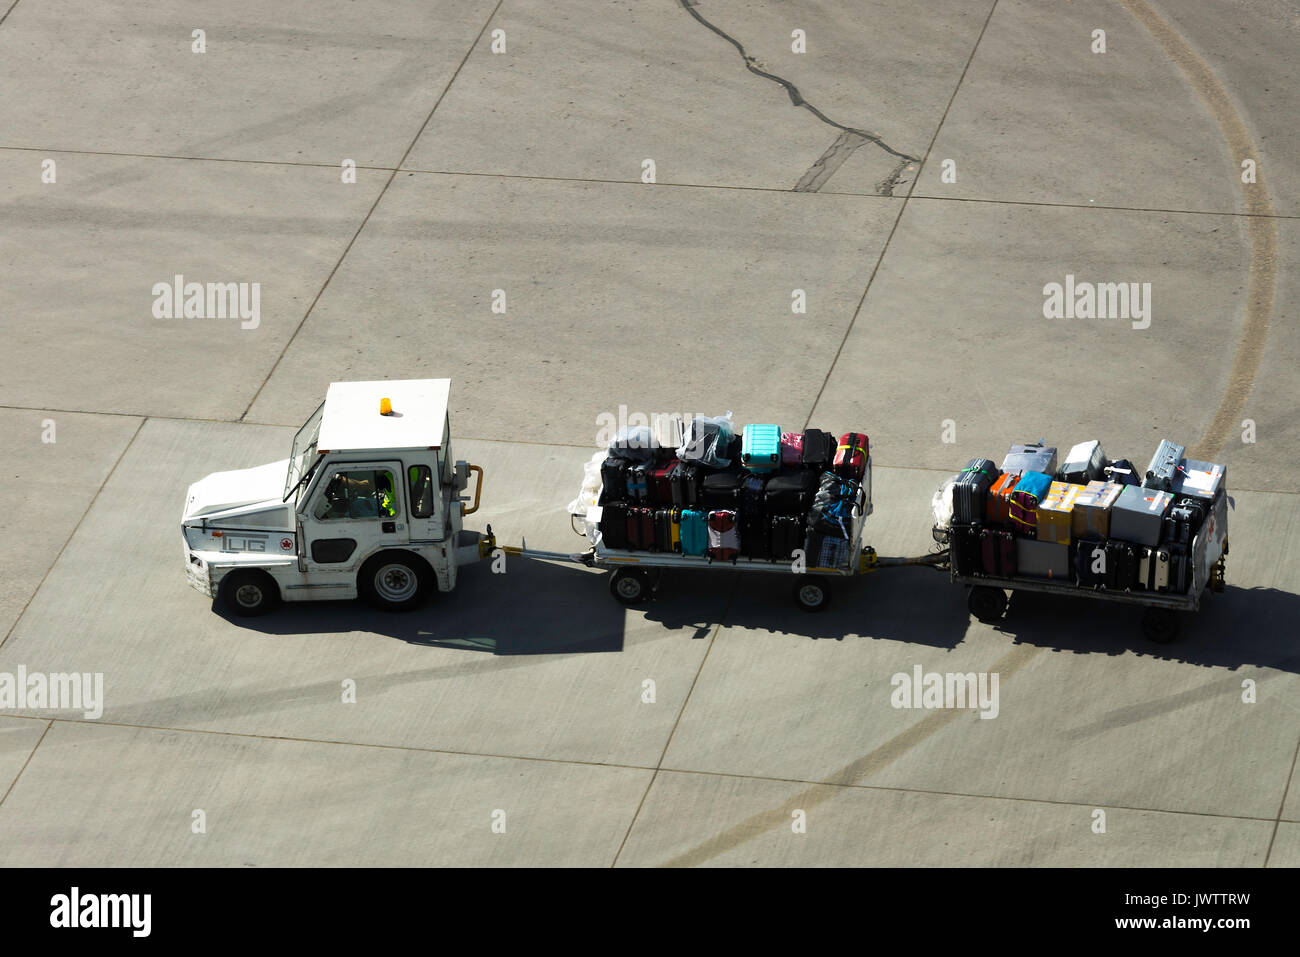 Suitcases on Trolleys Being Pulled by a Tug on Roadway Prior to Loading on Aircraft at Calgary International Airport Alberta Canada Stock Photo